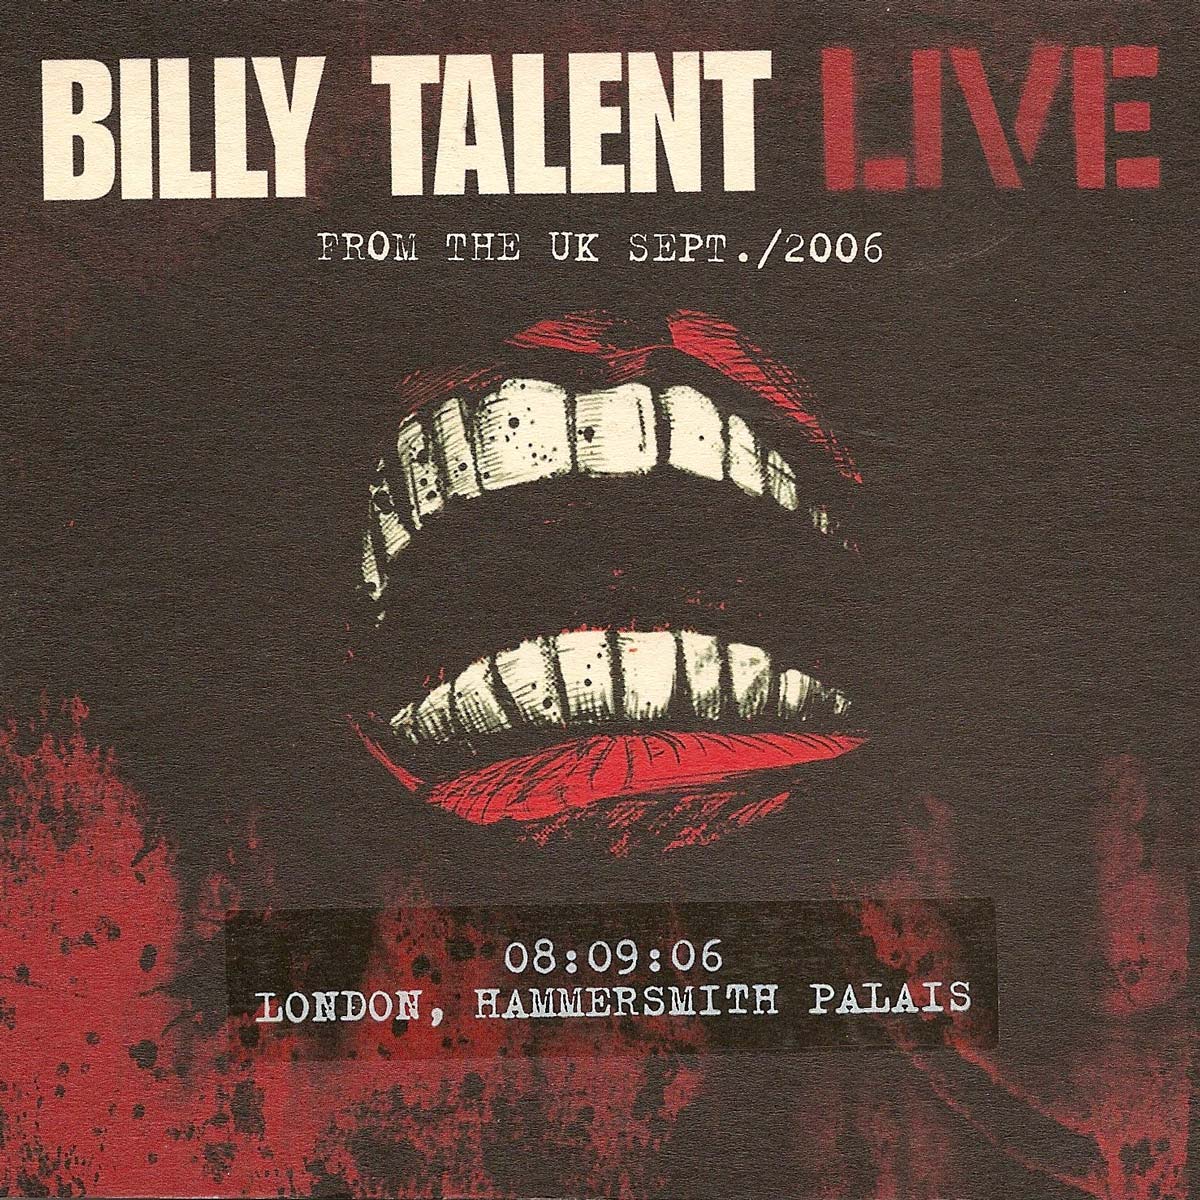 Discographie - Billy Talent - Live from the UK - London Hammersmith Palais